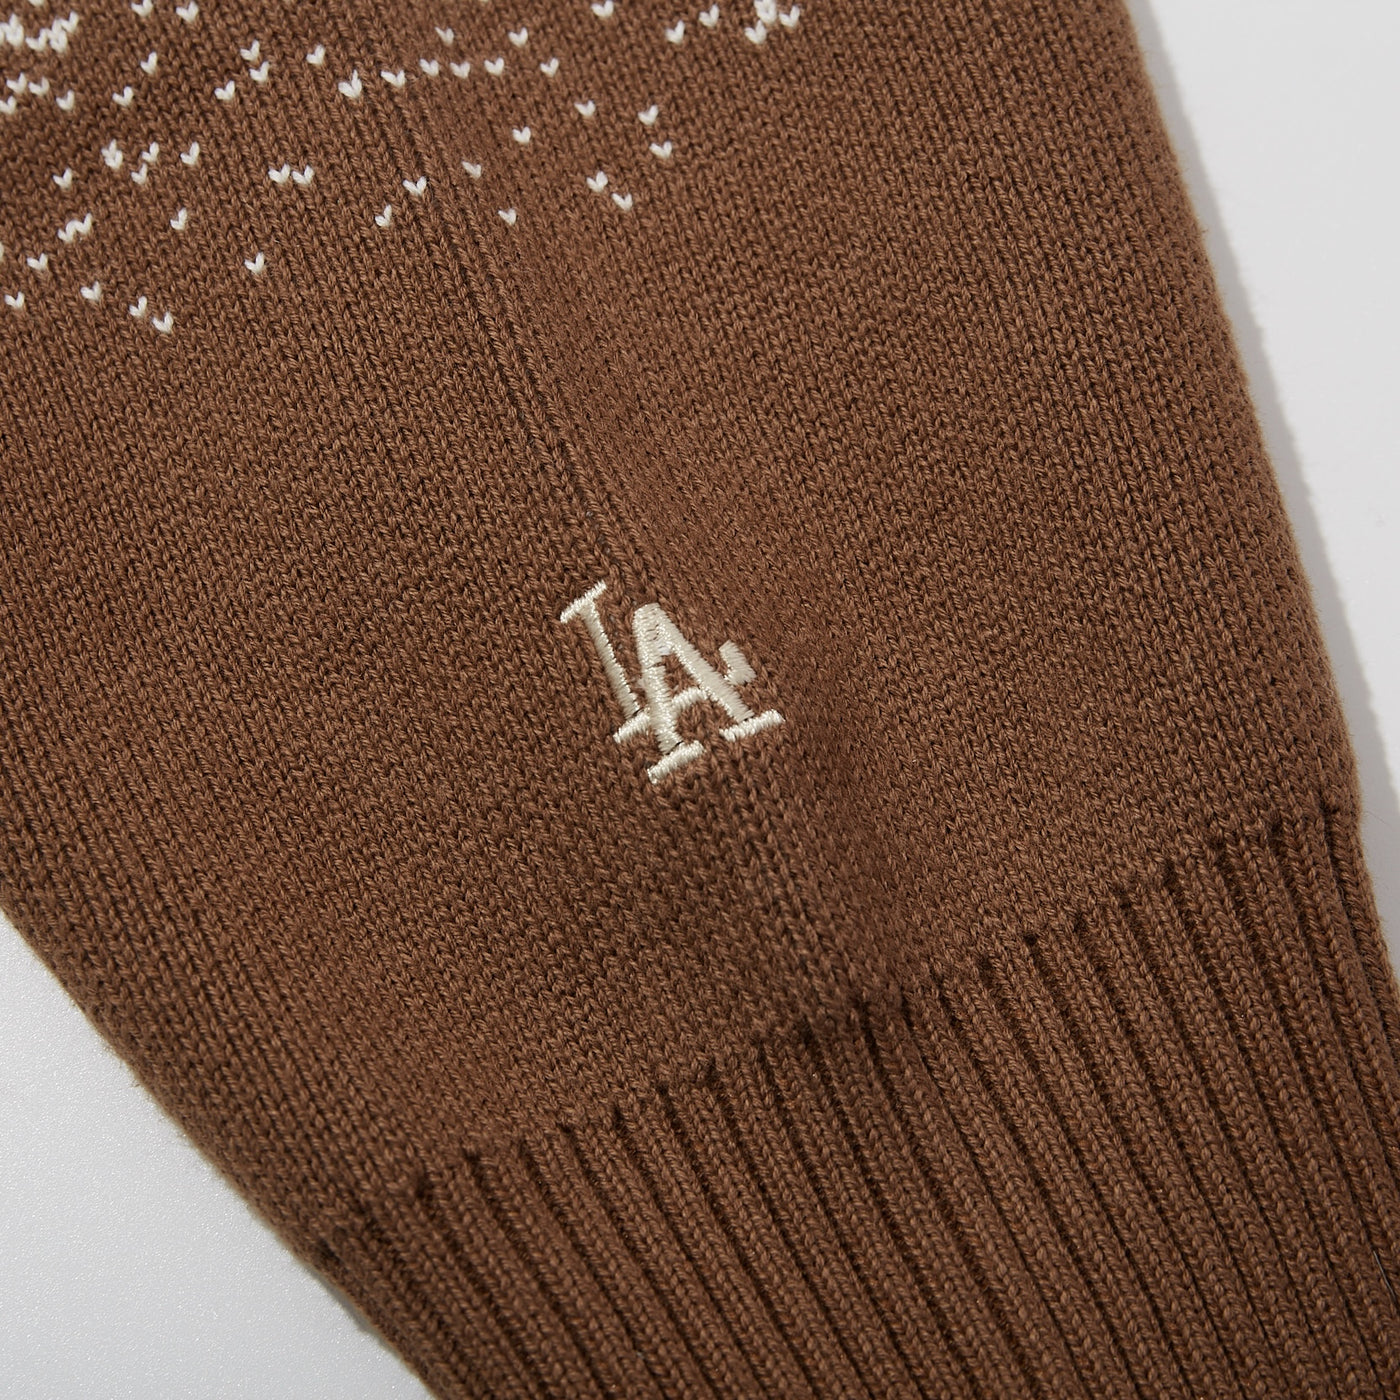 LOS ANGELES DODGERS ANCIENT CULTURE WHITE AND BROWN GRADIENT CARDIGAN